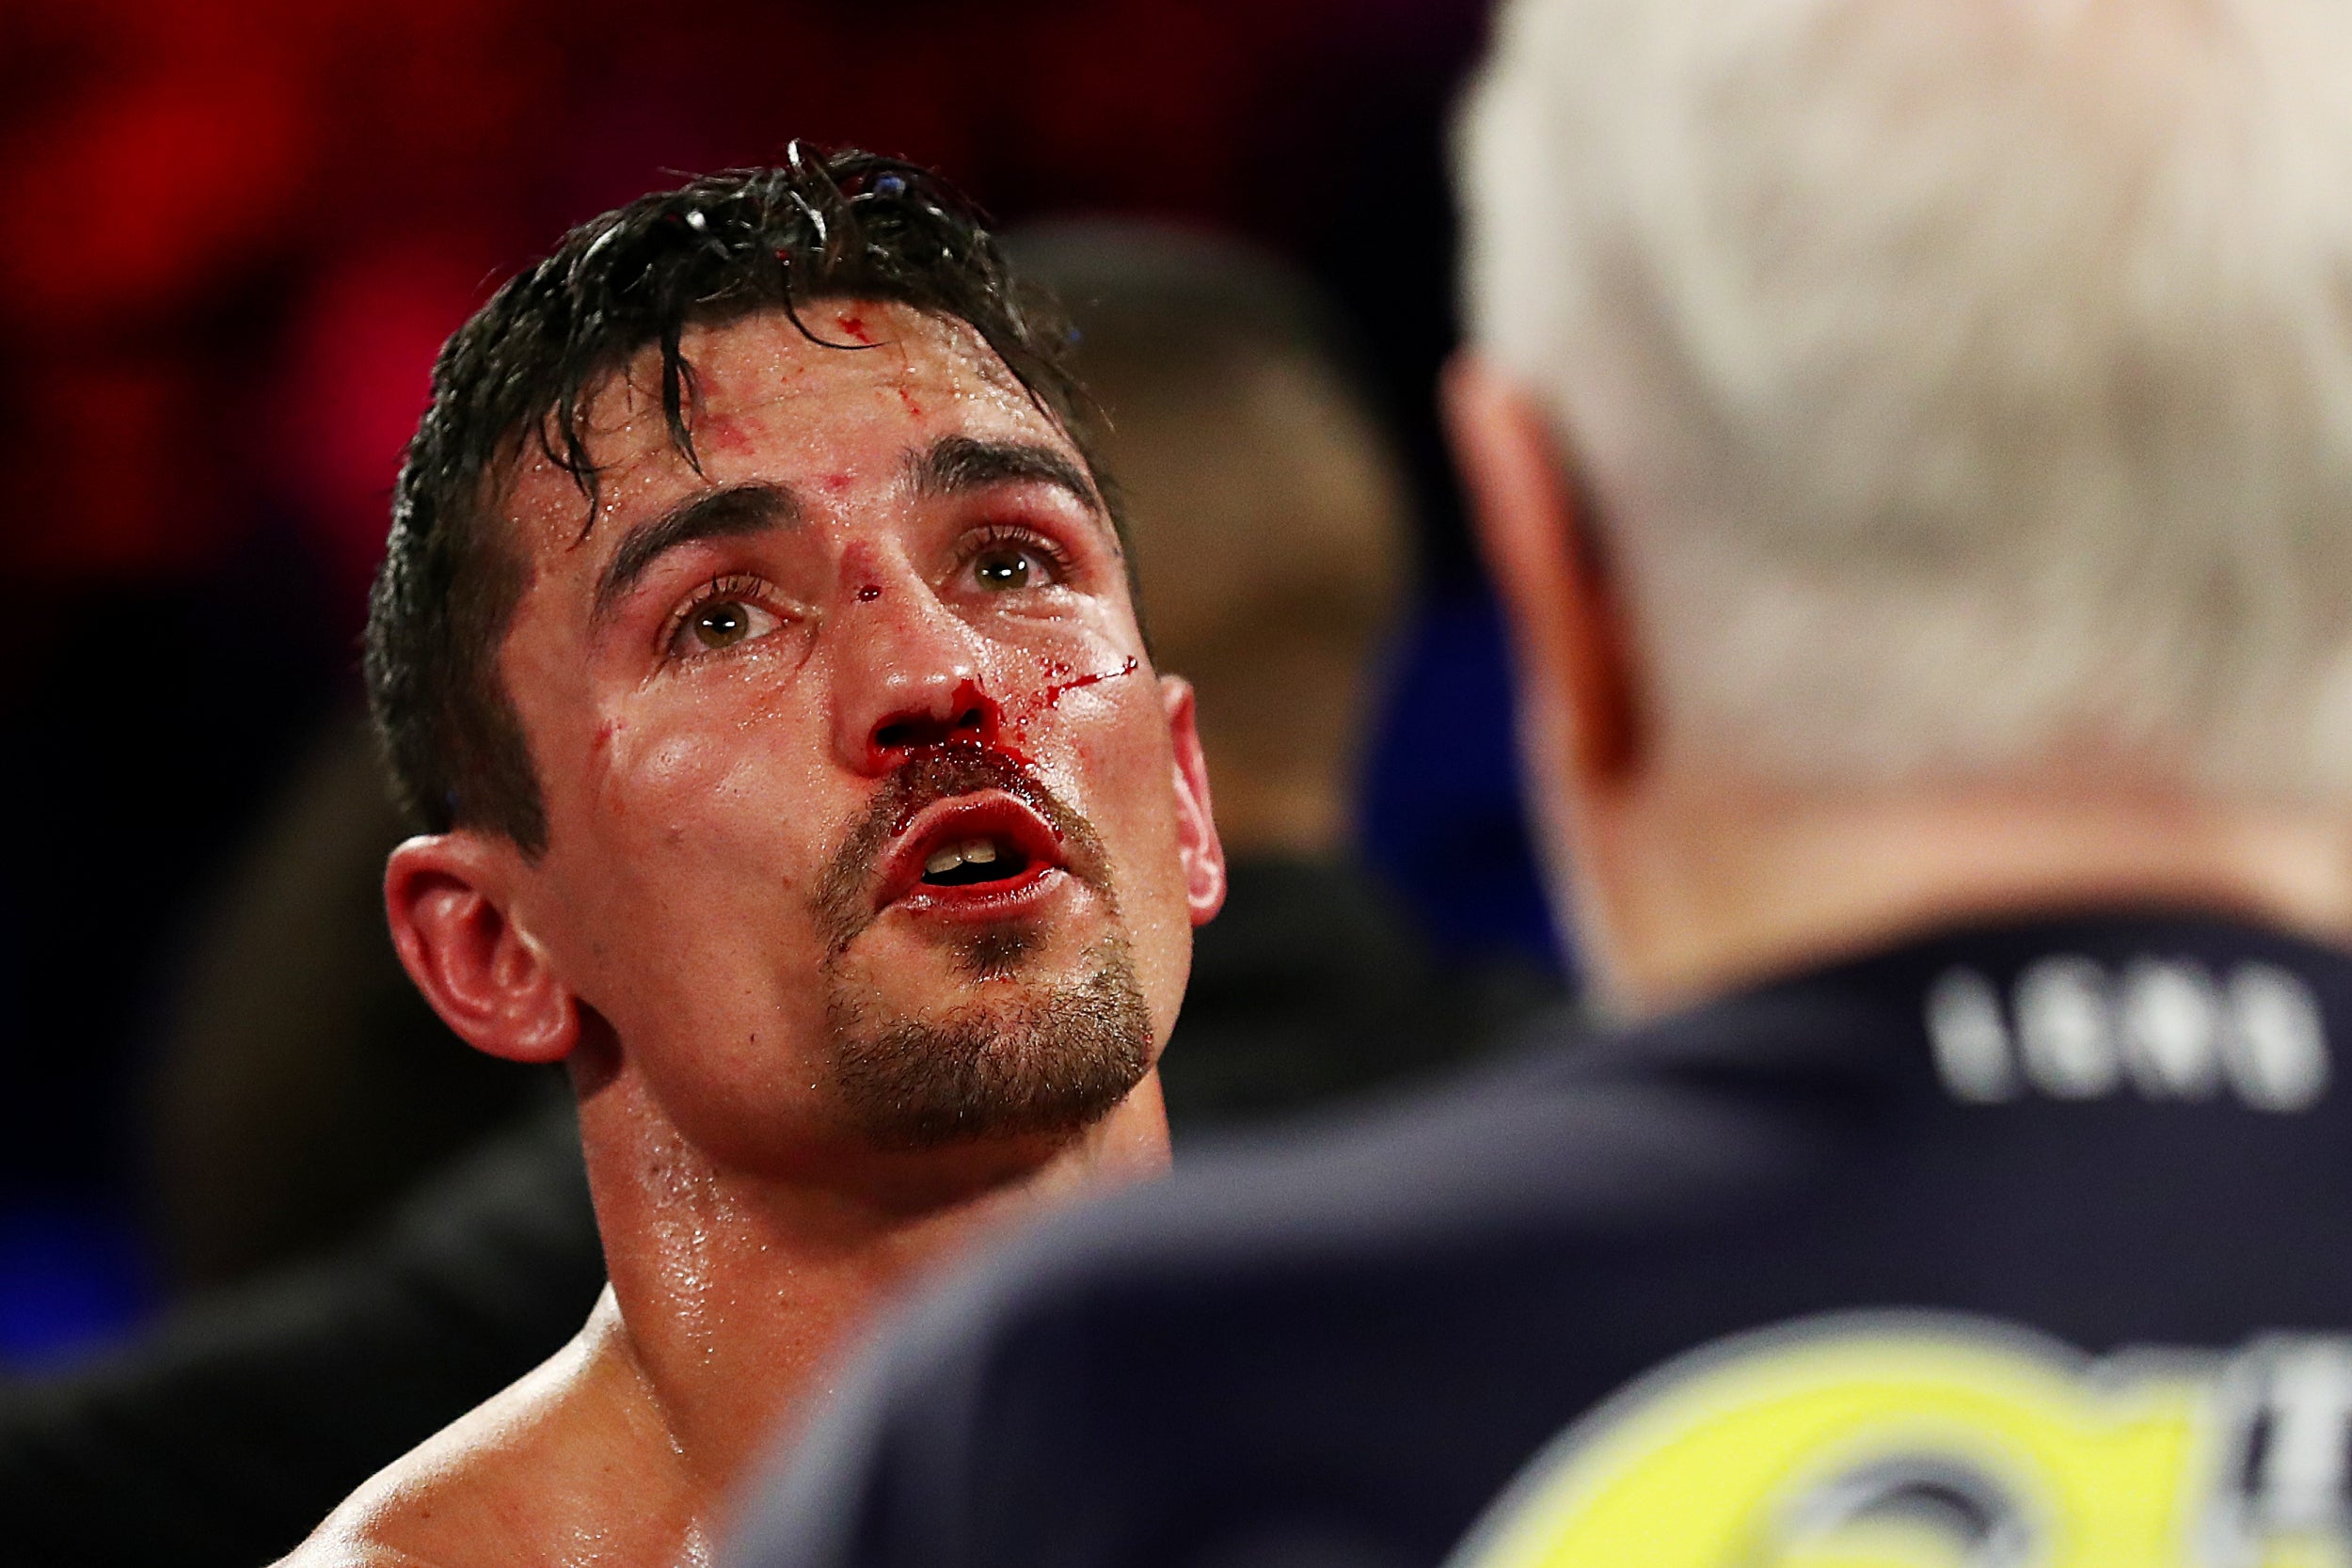 Crolla suffered at the brutal hands of Lomachenko